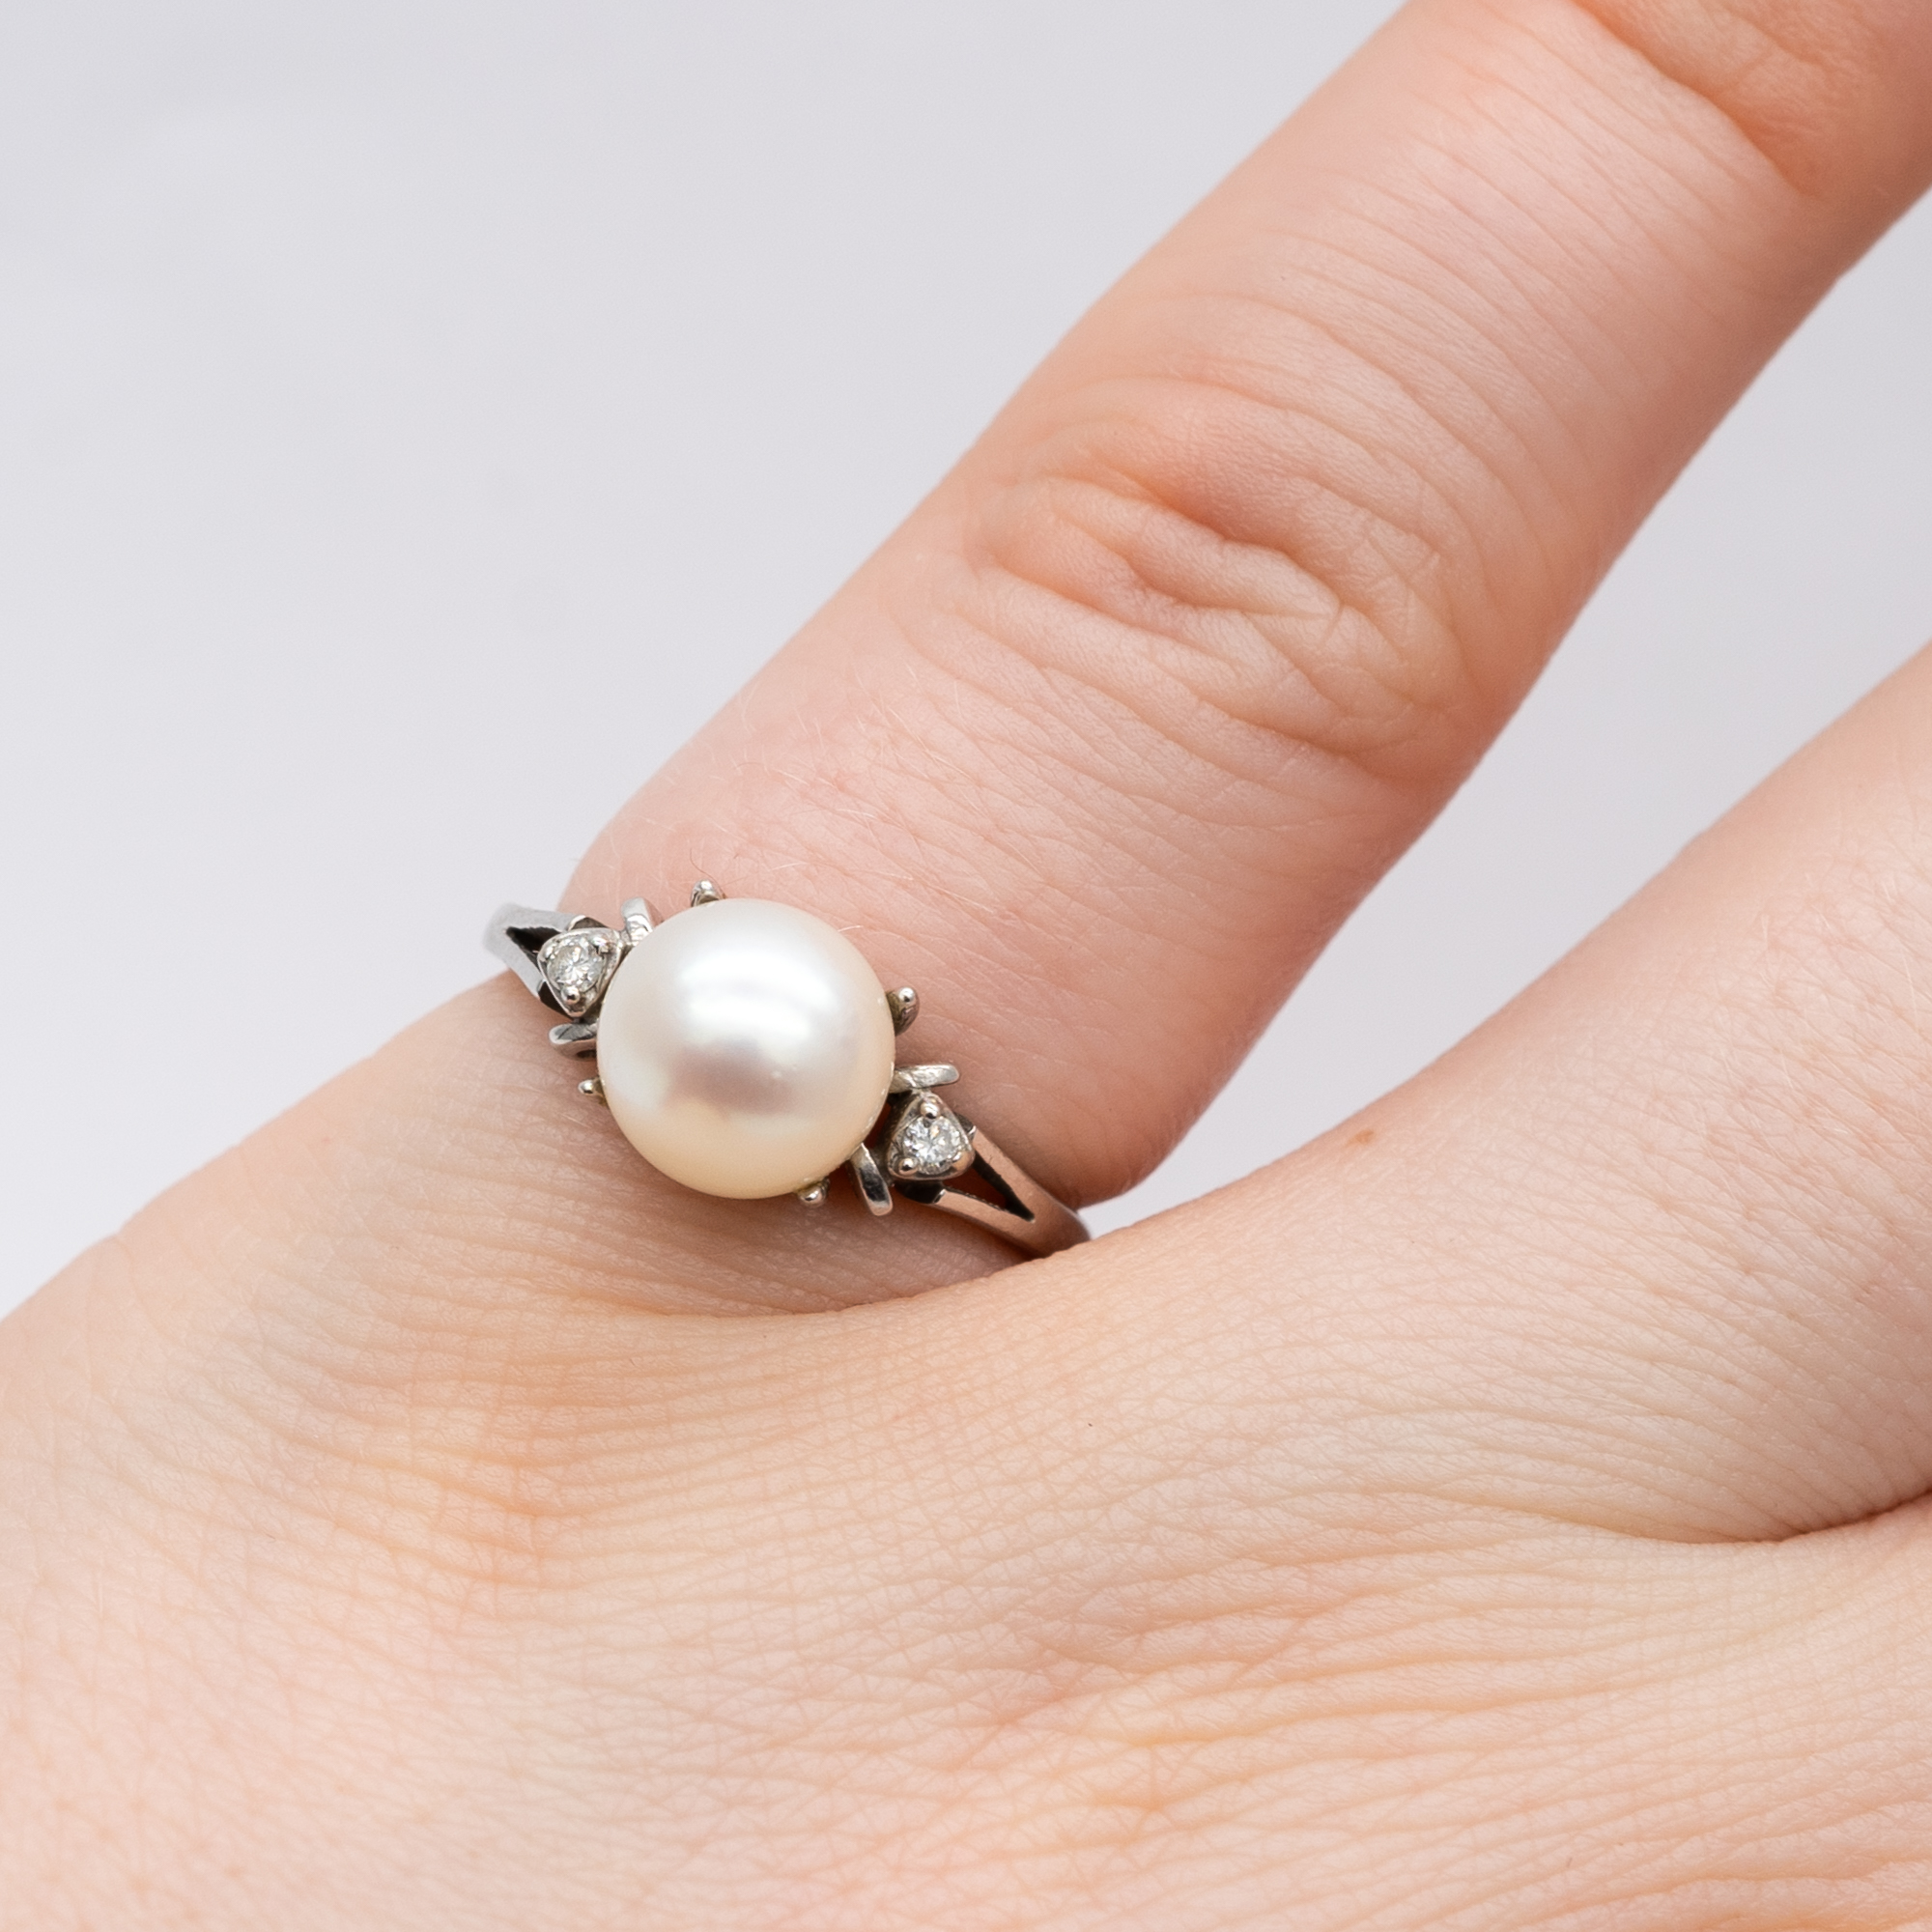 A 14ct white gold pearl and diamond ring with matching pendant - Image 6 of 7